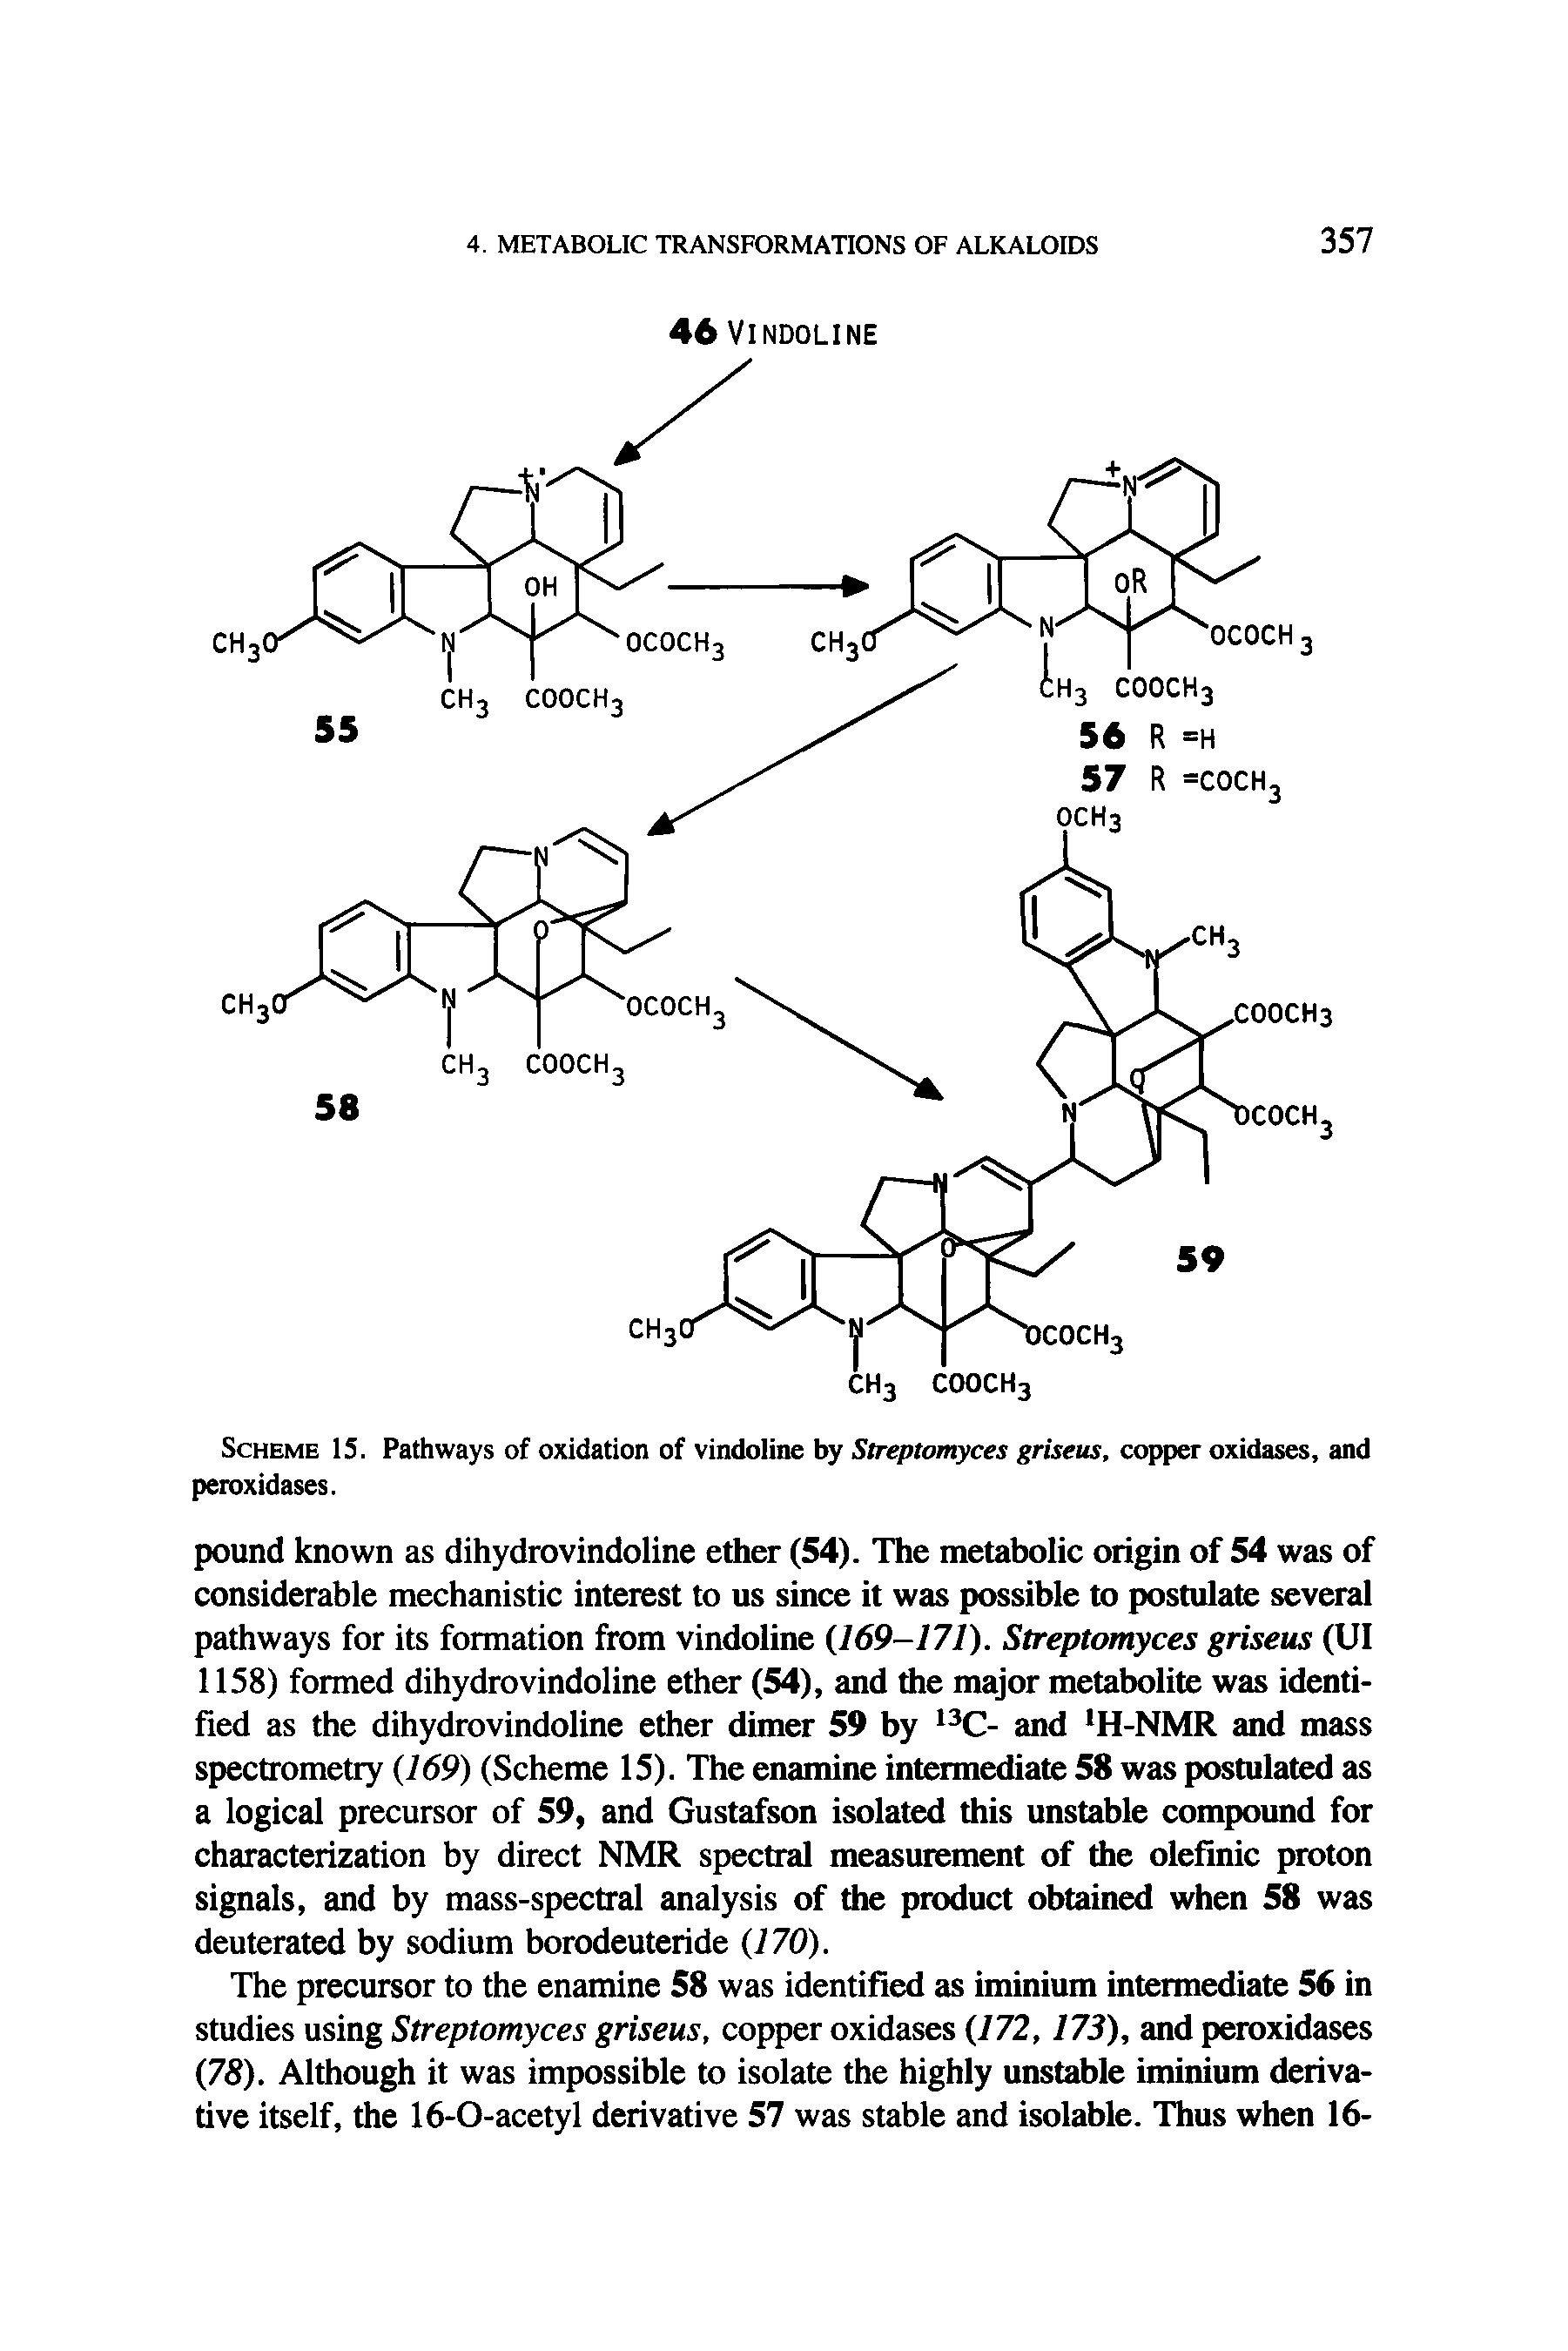 Scheme 15. Pathways of oxidation of vindoline by Streptomyces griseus, copper oxidases, and peroxidases.